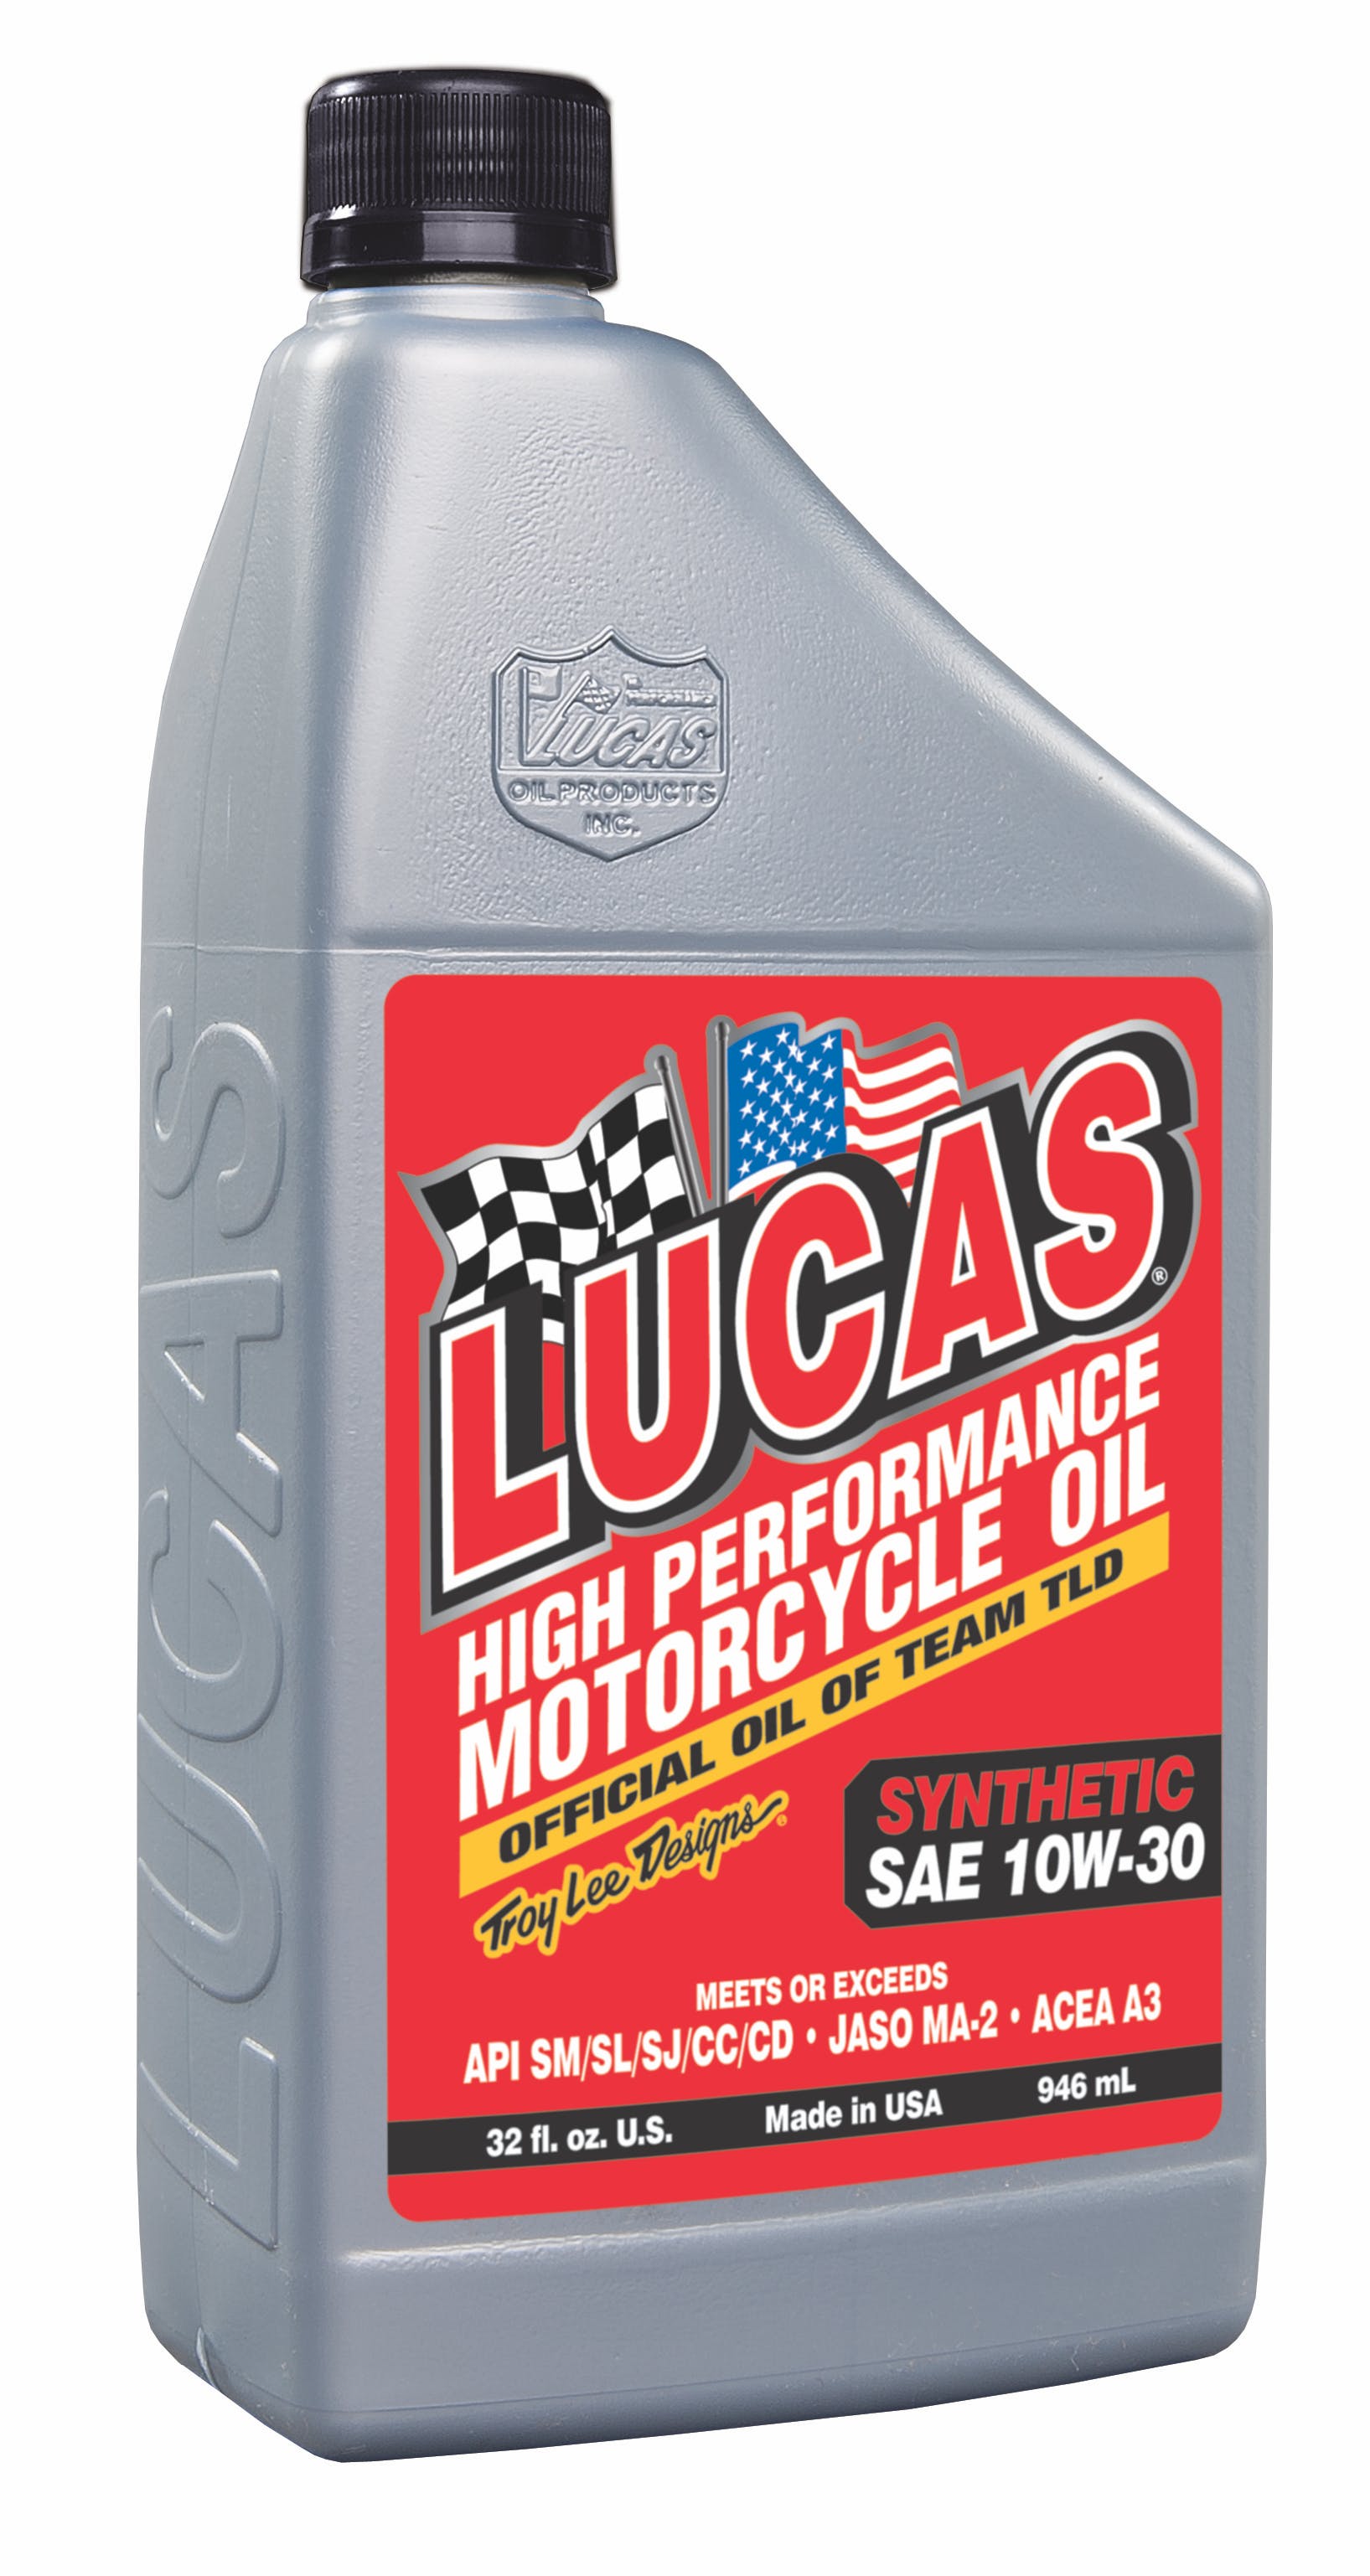 Lucas OIL Synthetic SAE 10W-30 Motorcycle Oil (1 QT) 20708